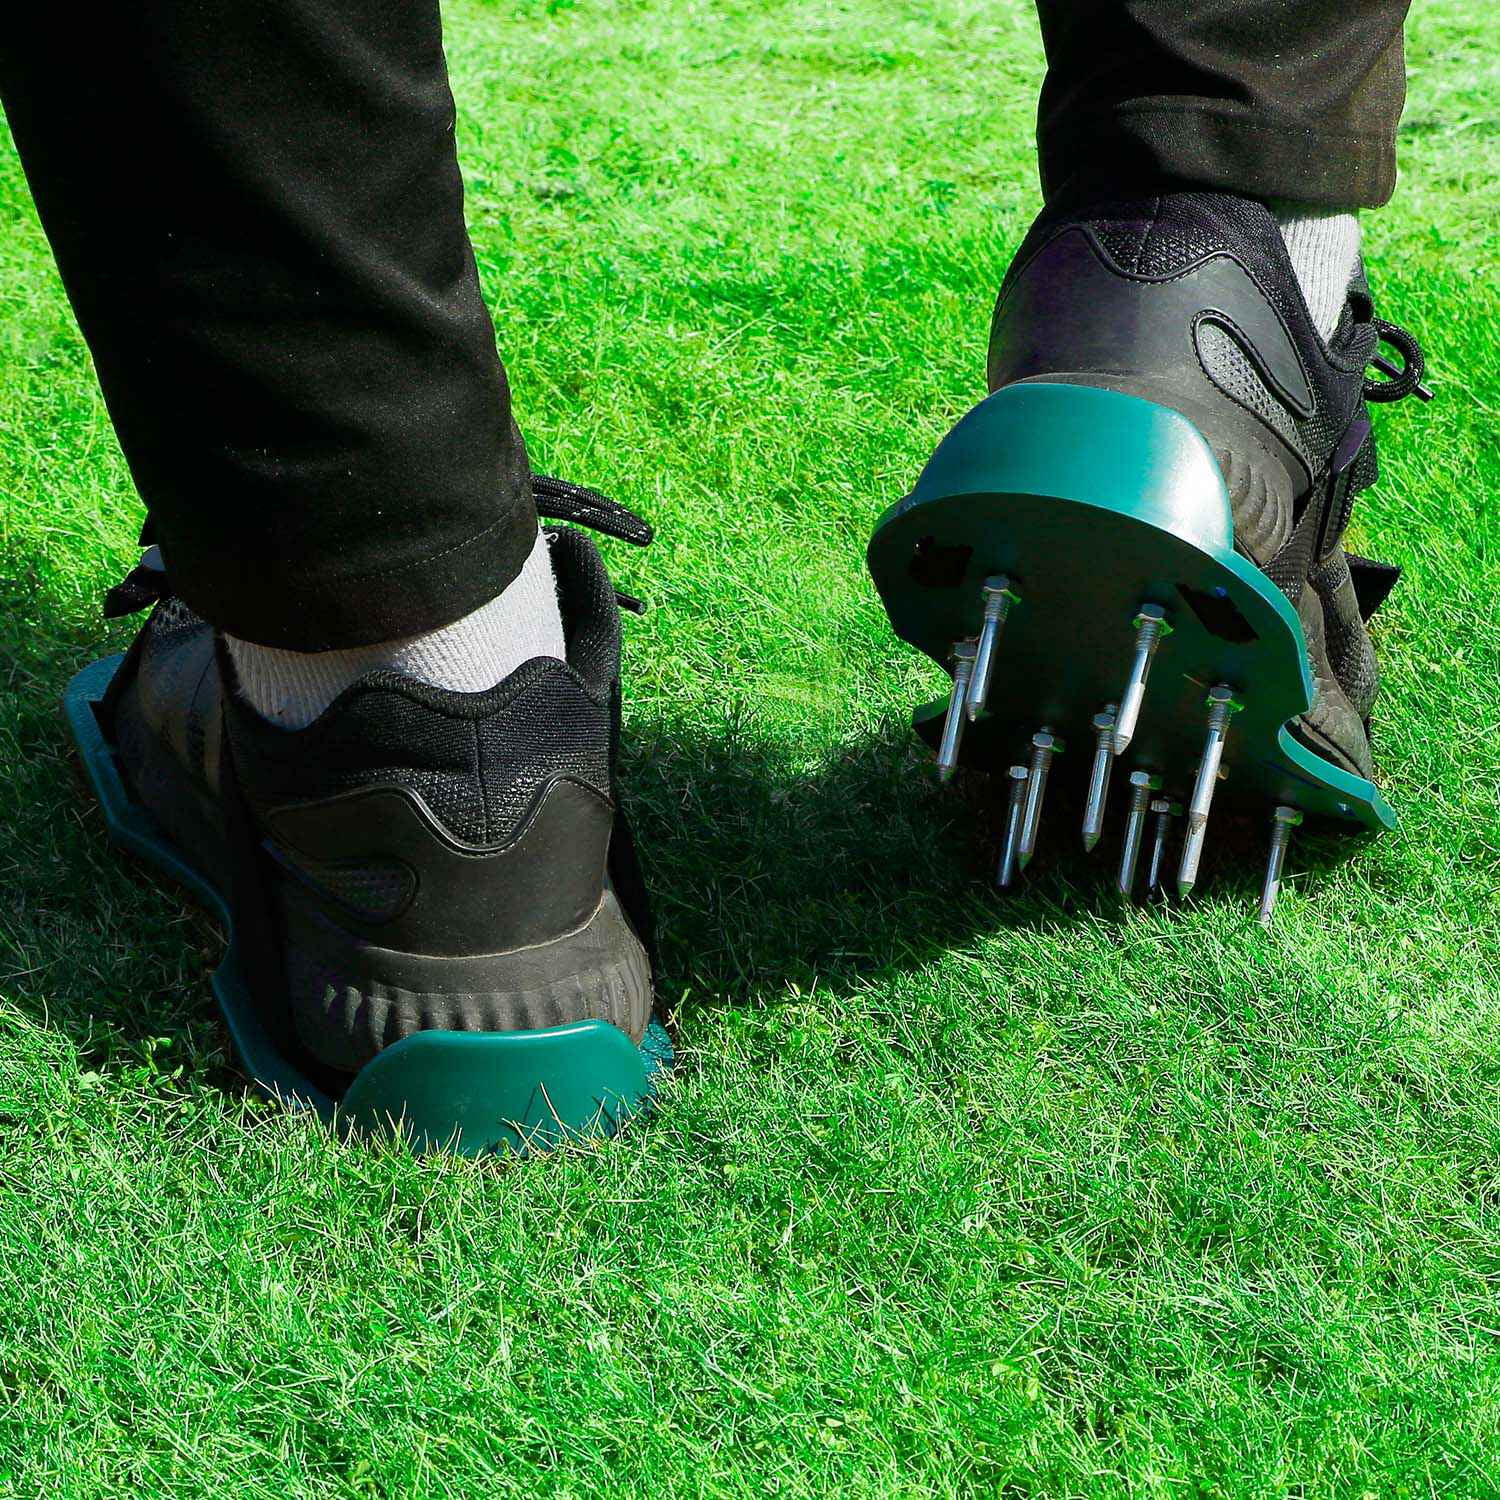 Details about   Yard Aerator Shoes Lawn Spiked Aeration Heavy Duty Garden Sandals Aerating Soil 